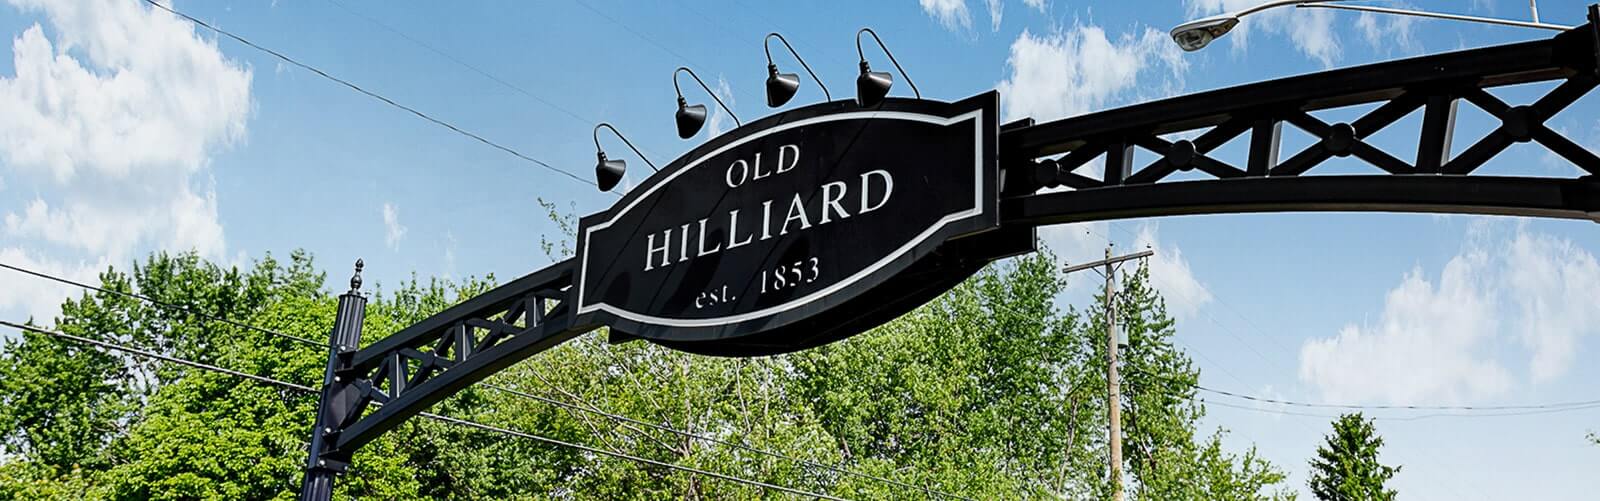 street sign with "Old Hilliard" in English script.